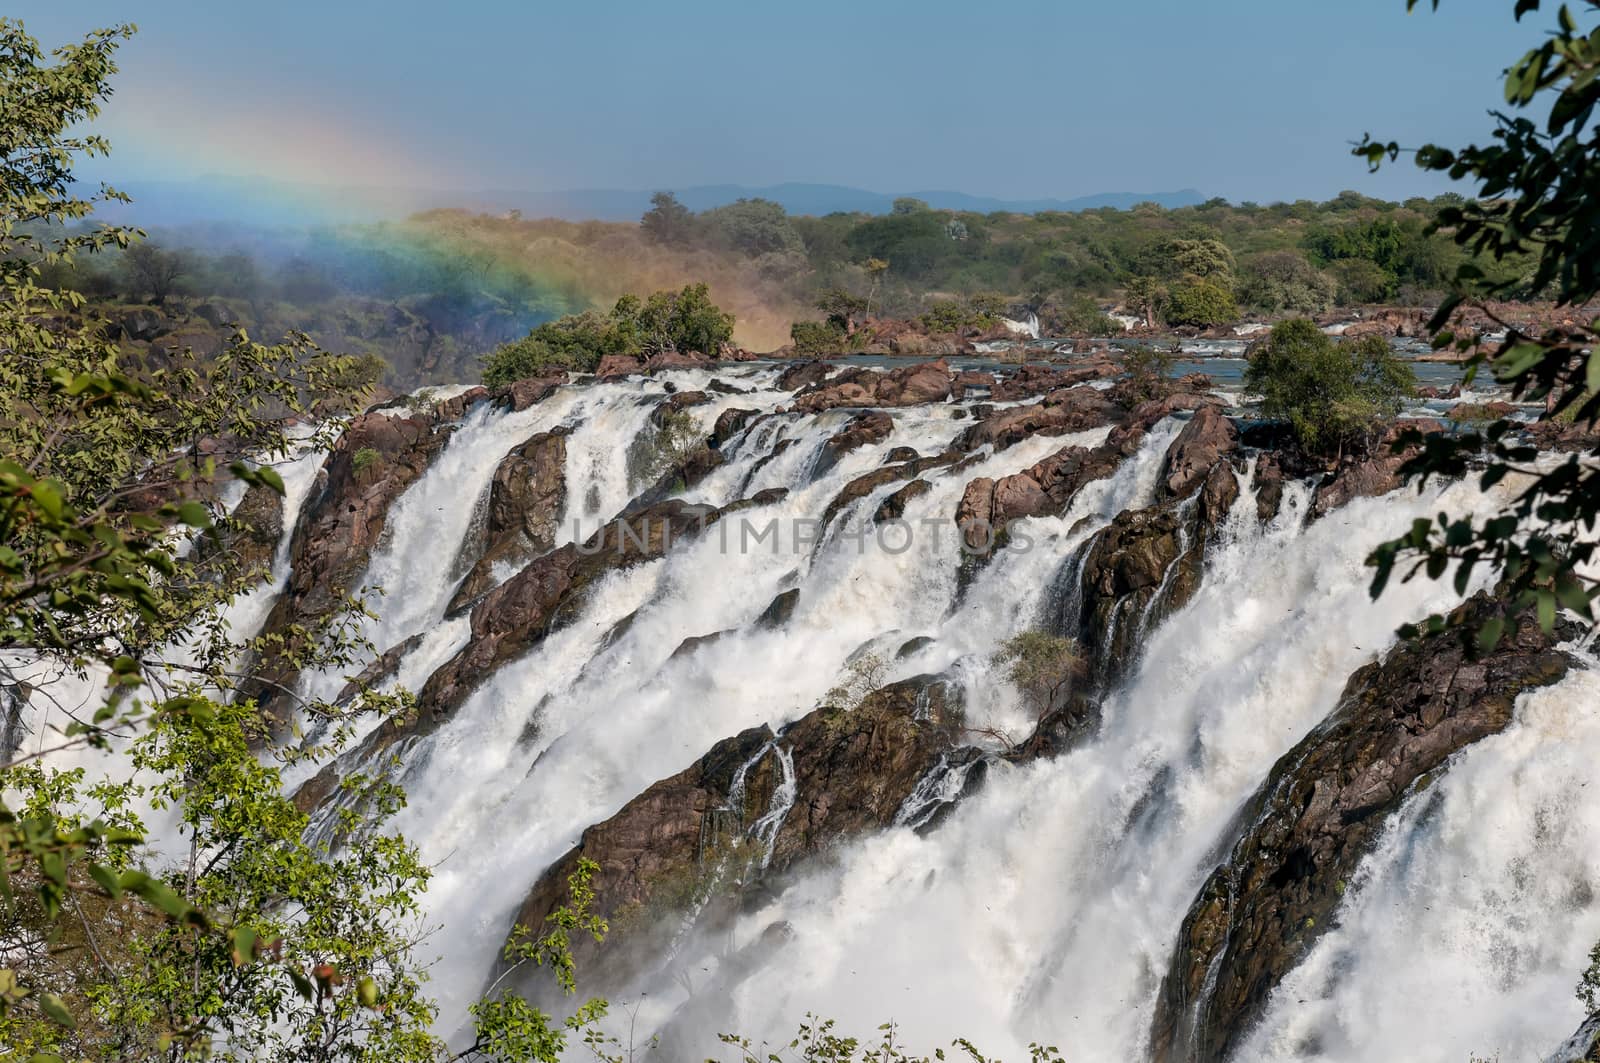 Part of the Ruacana waterfall in the Kunene River. A rainbow and dragonflies are visible